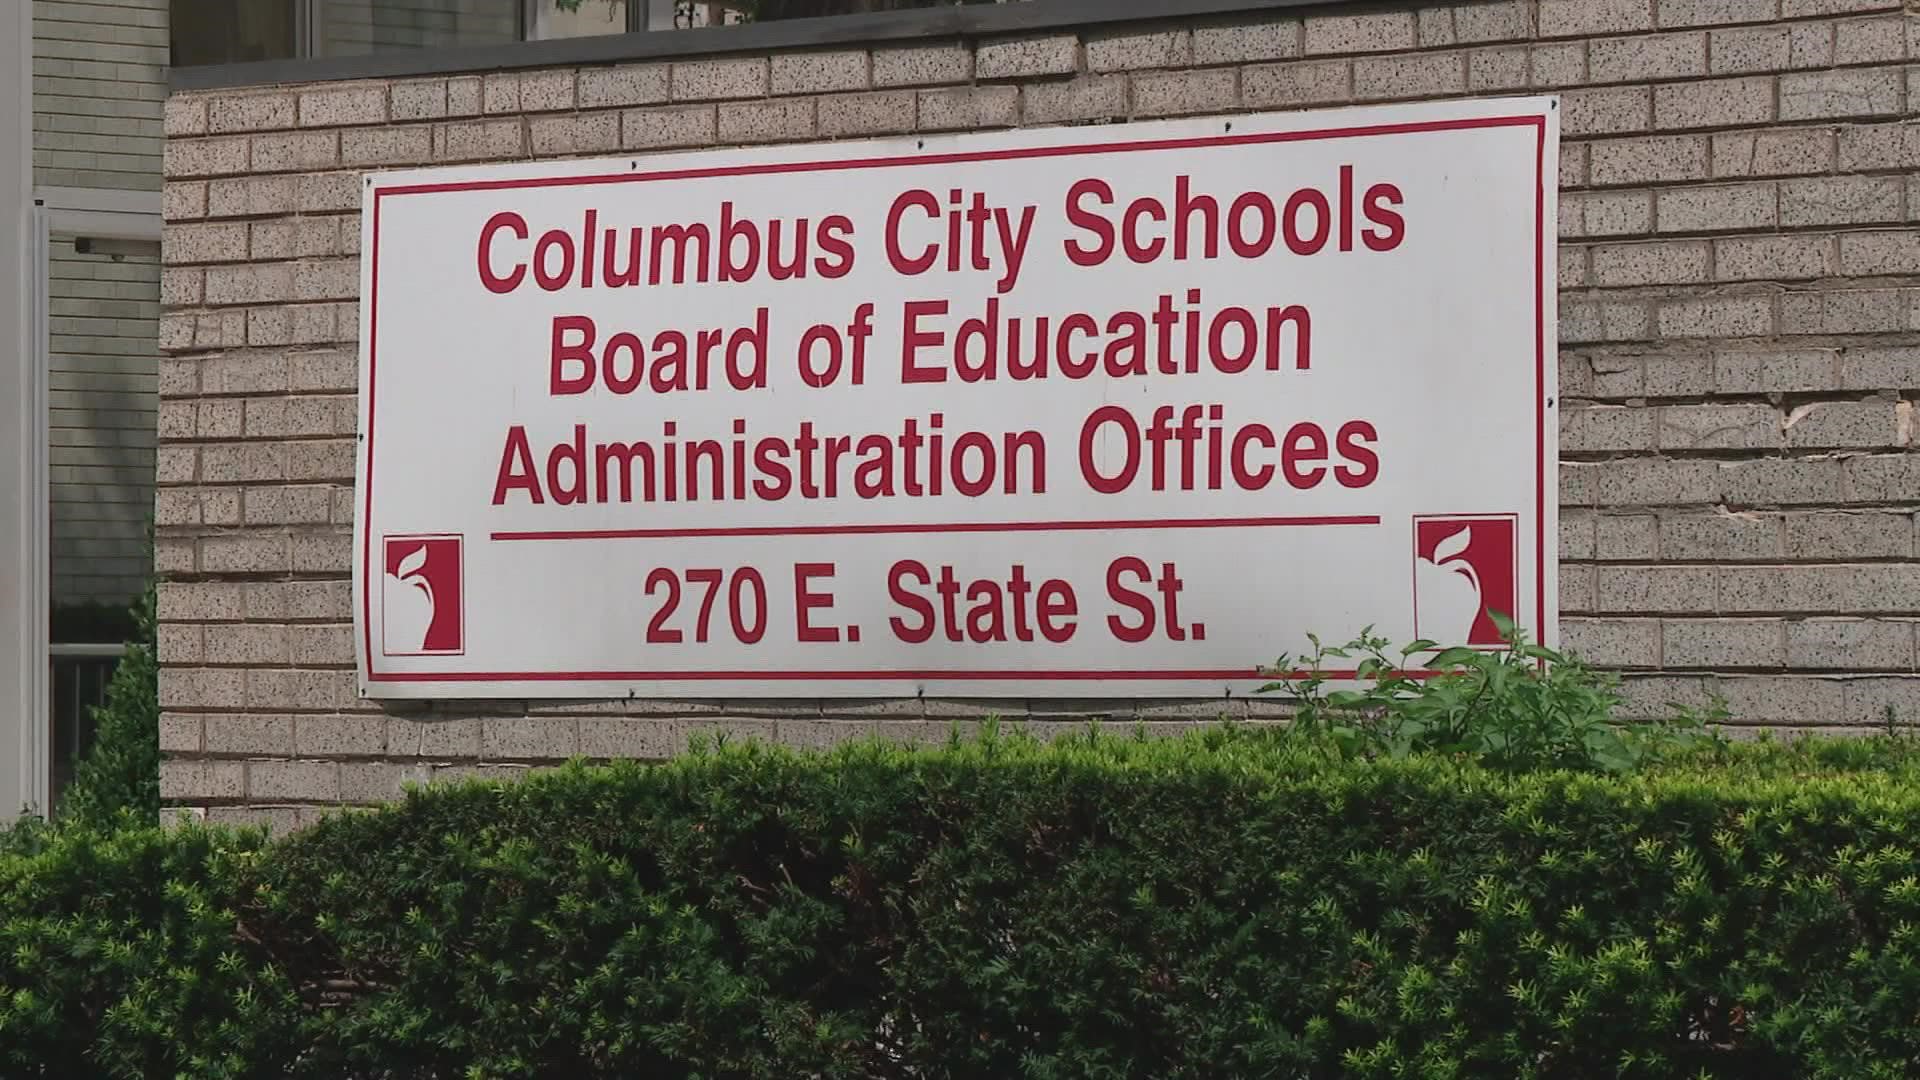 If the two groups don’t meet or come to an agreement by Aug. 22, the Columbus Education Association has plans to strike.